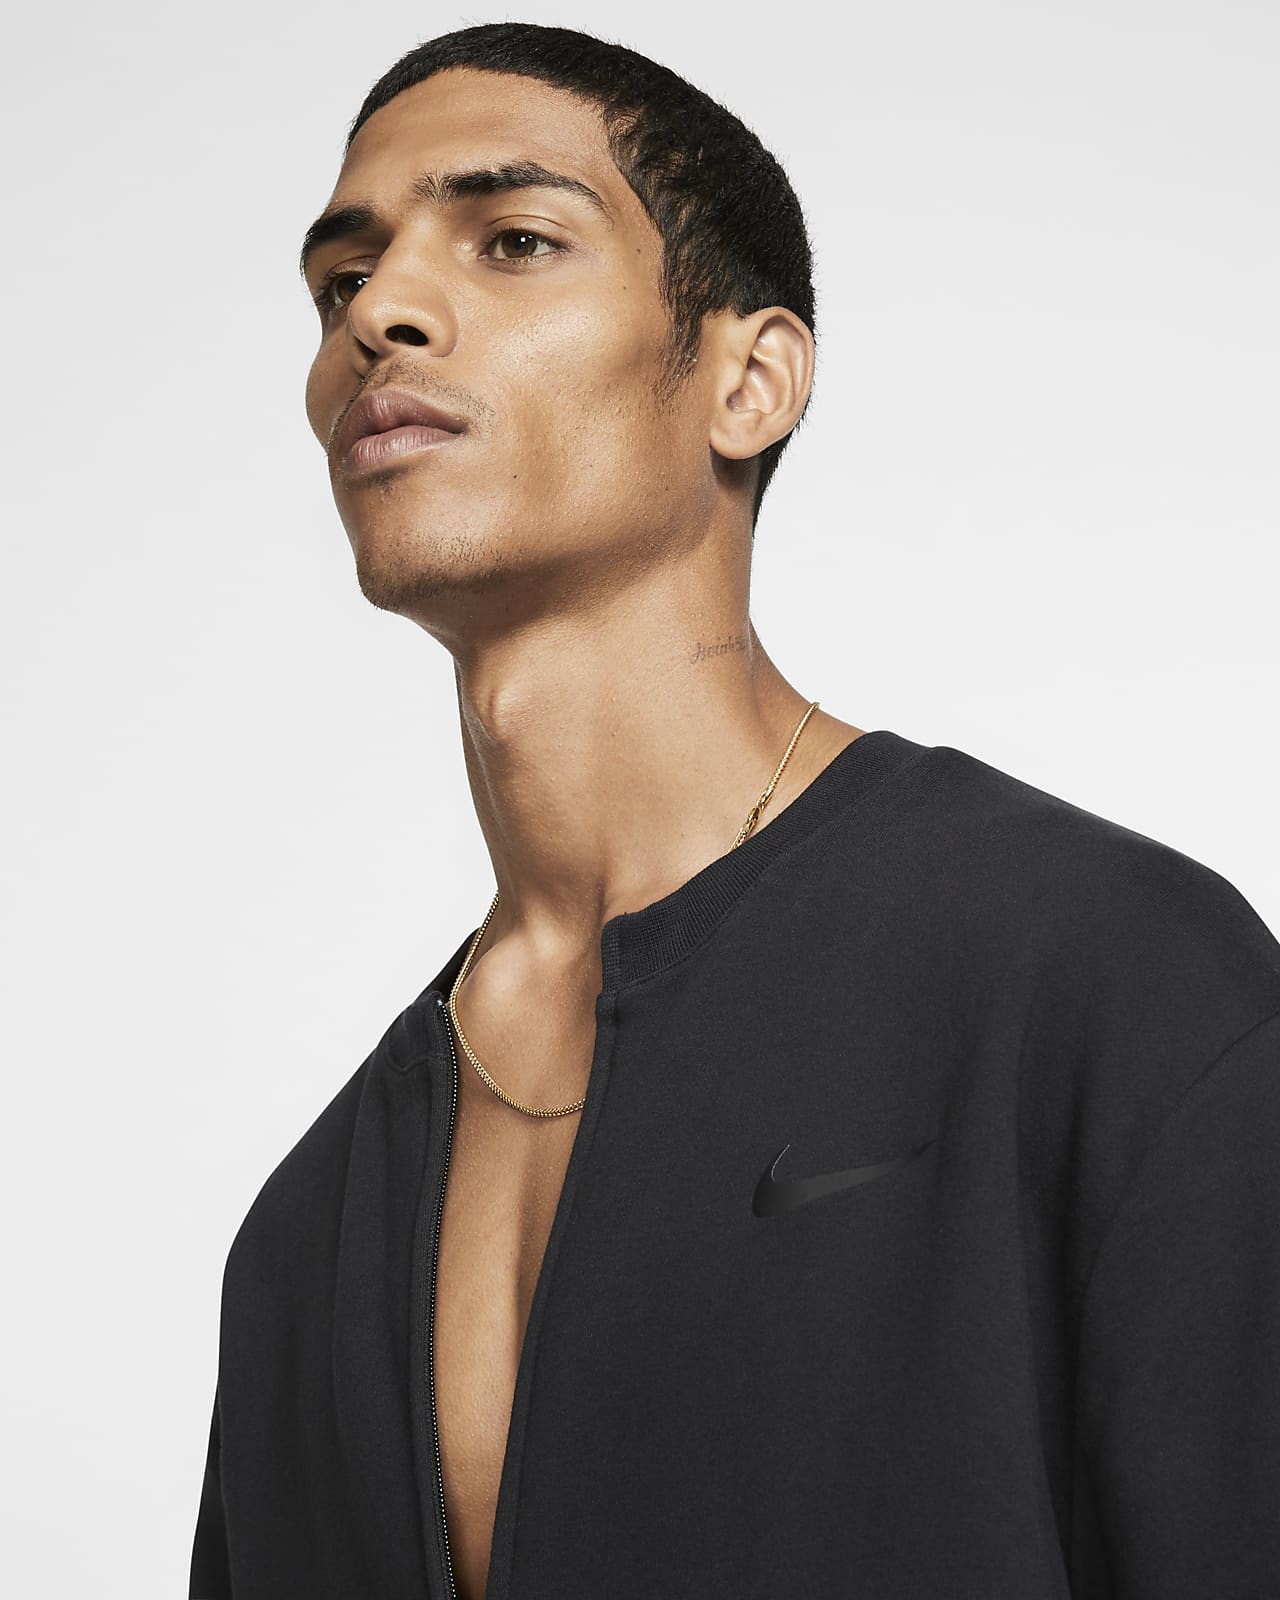 Nike x Fear of God Men’s Warm-Up Top